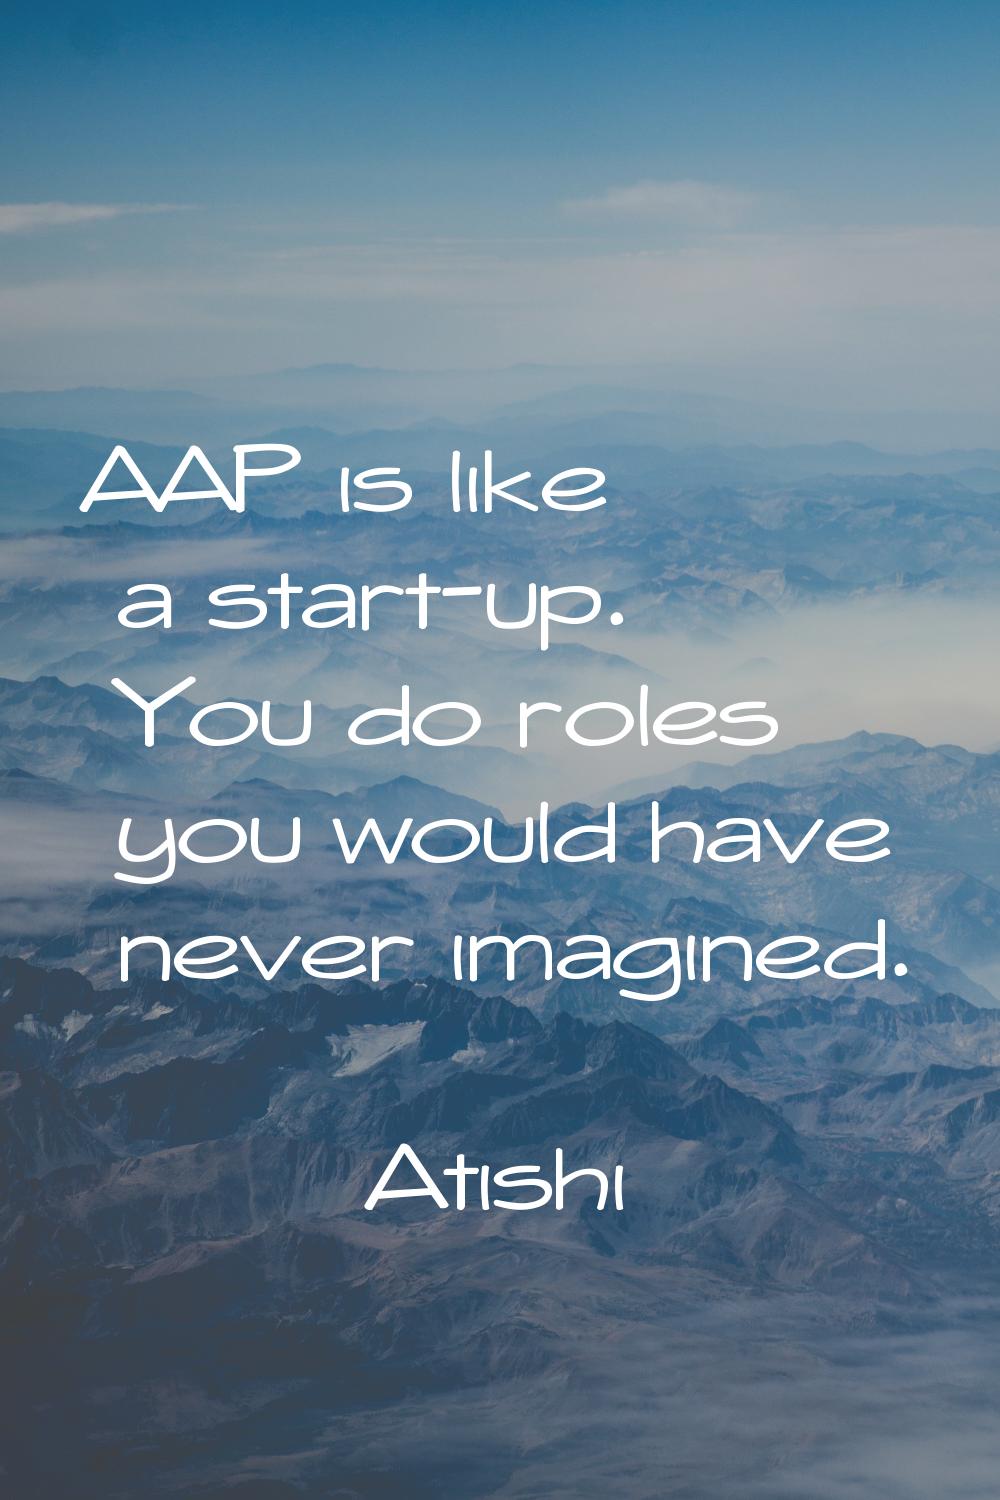 AAP is like a start-up. You do roles you would have never imagined.